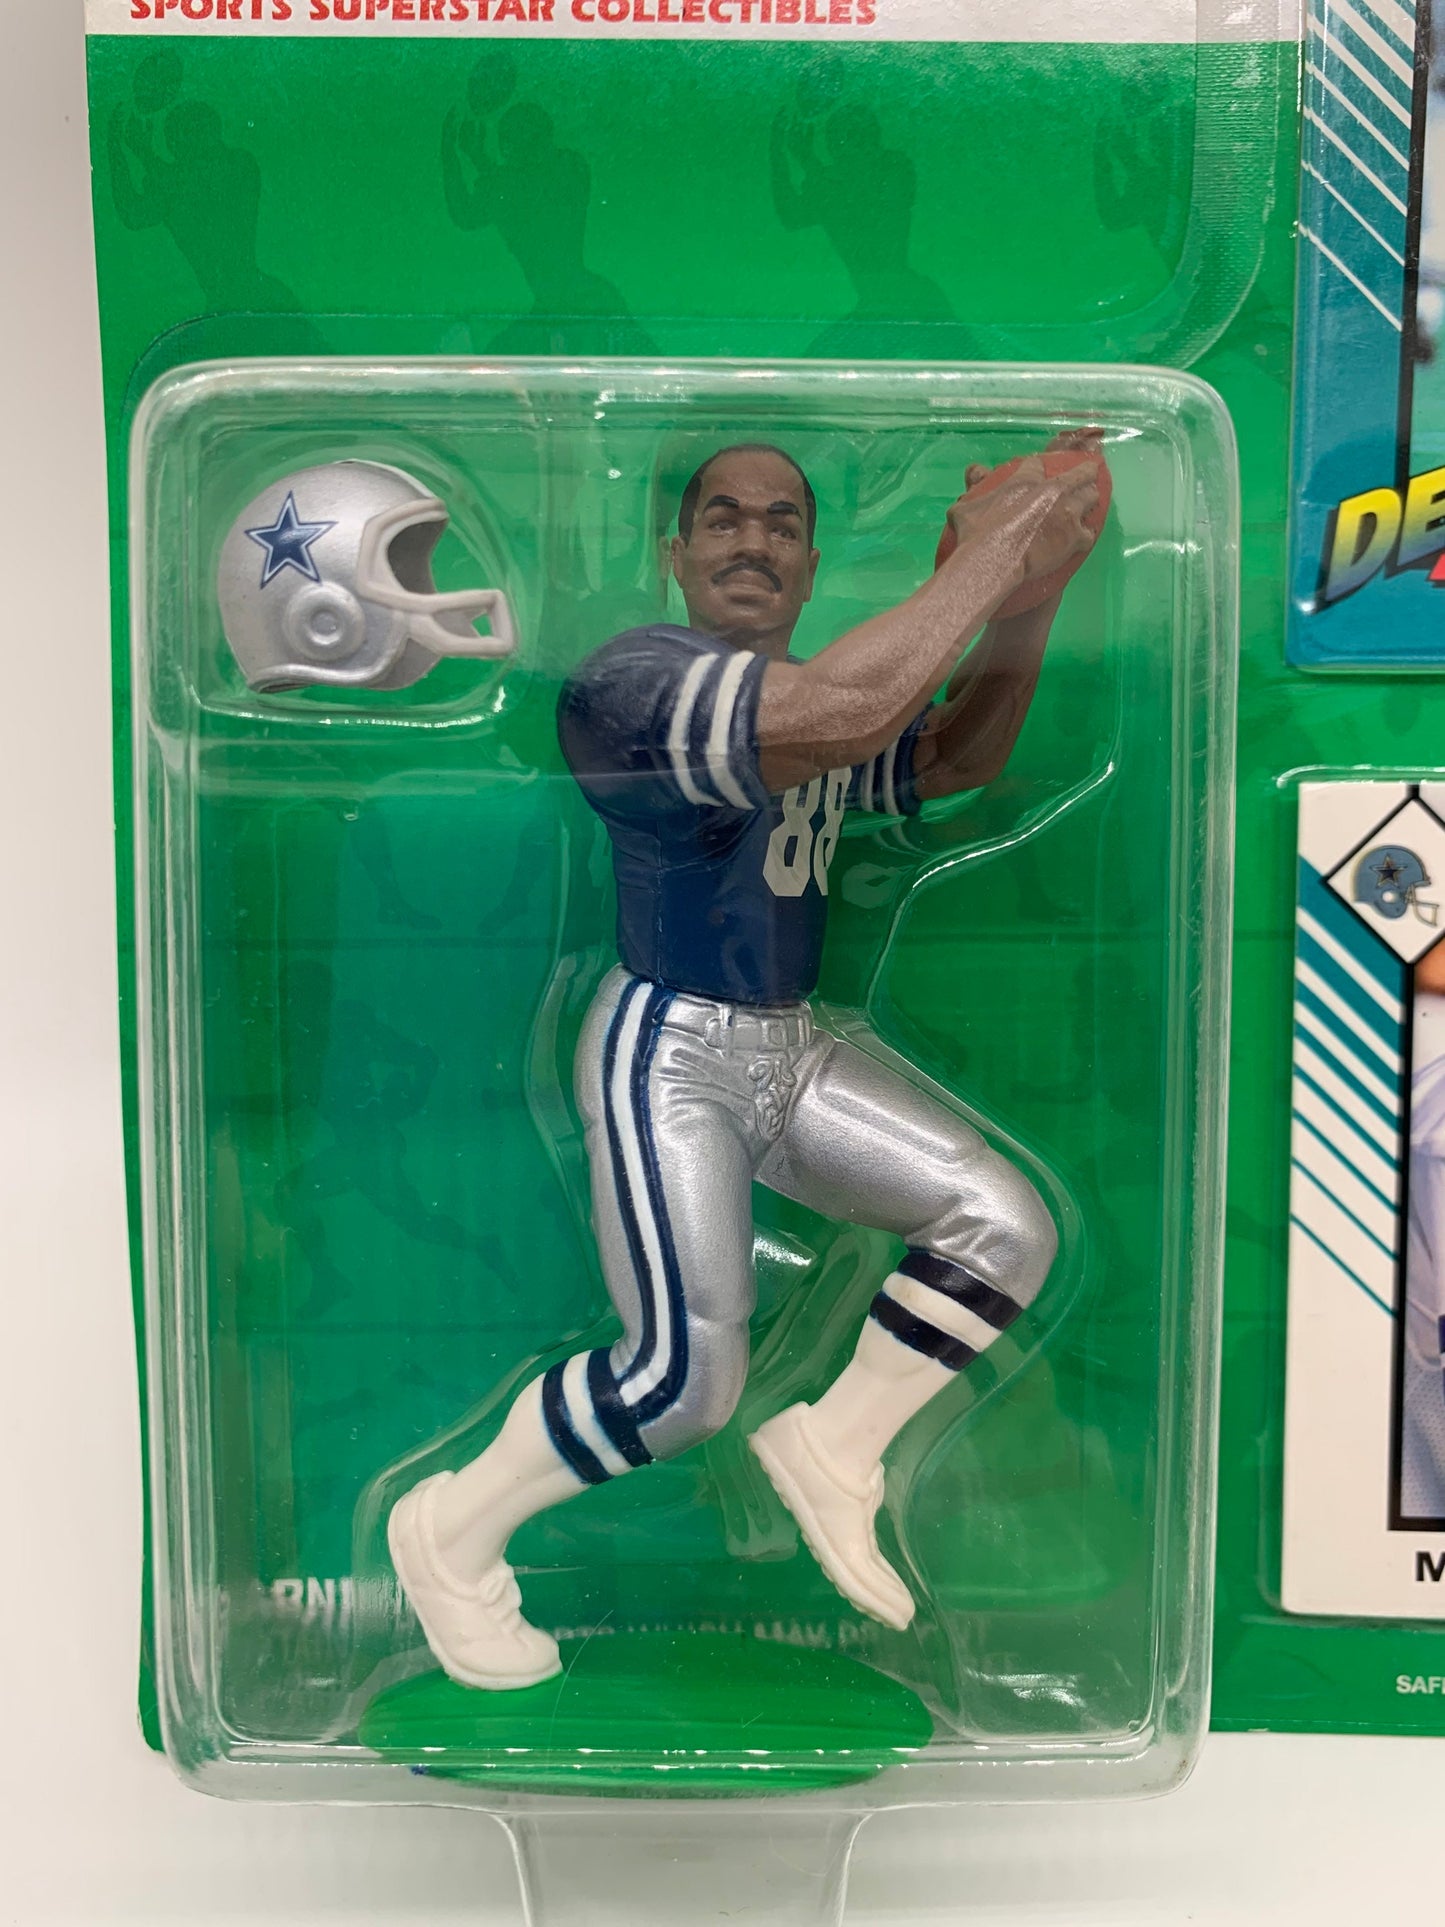 Michael Irvin Starting Lineup collectible sports figure